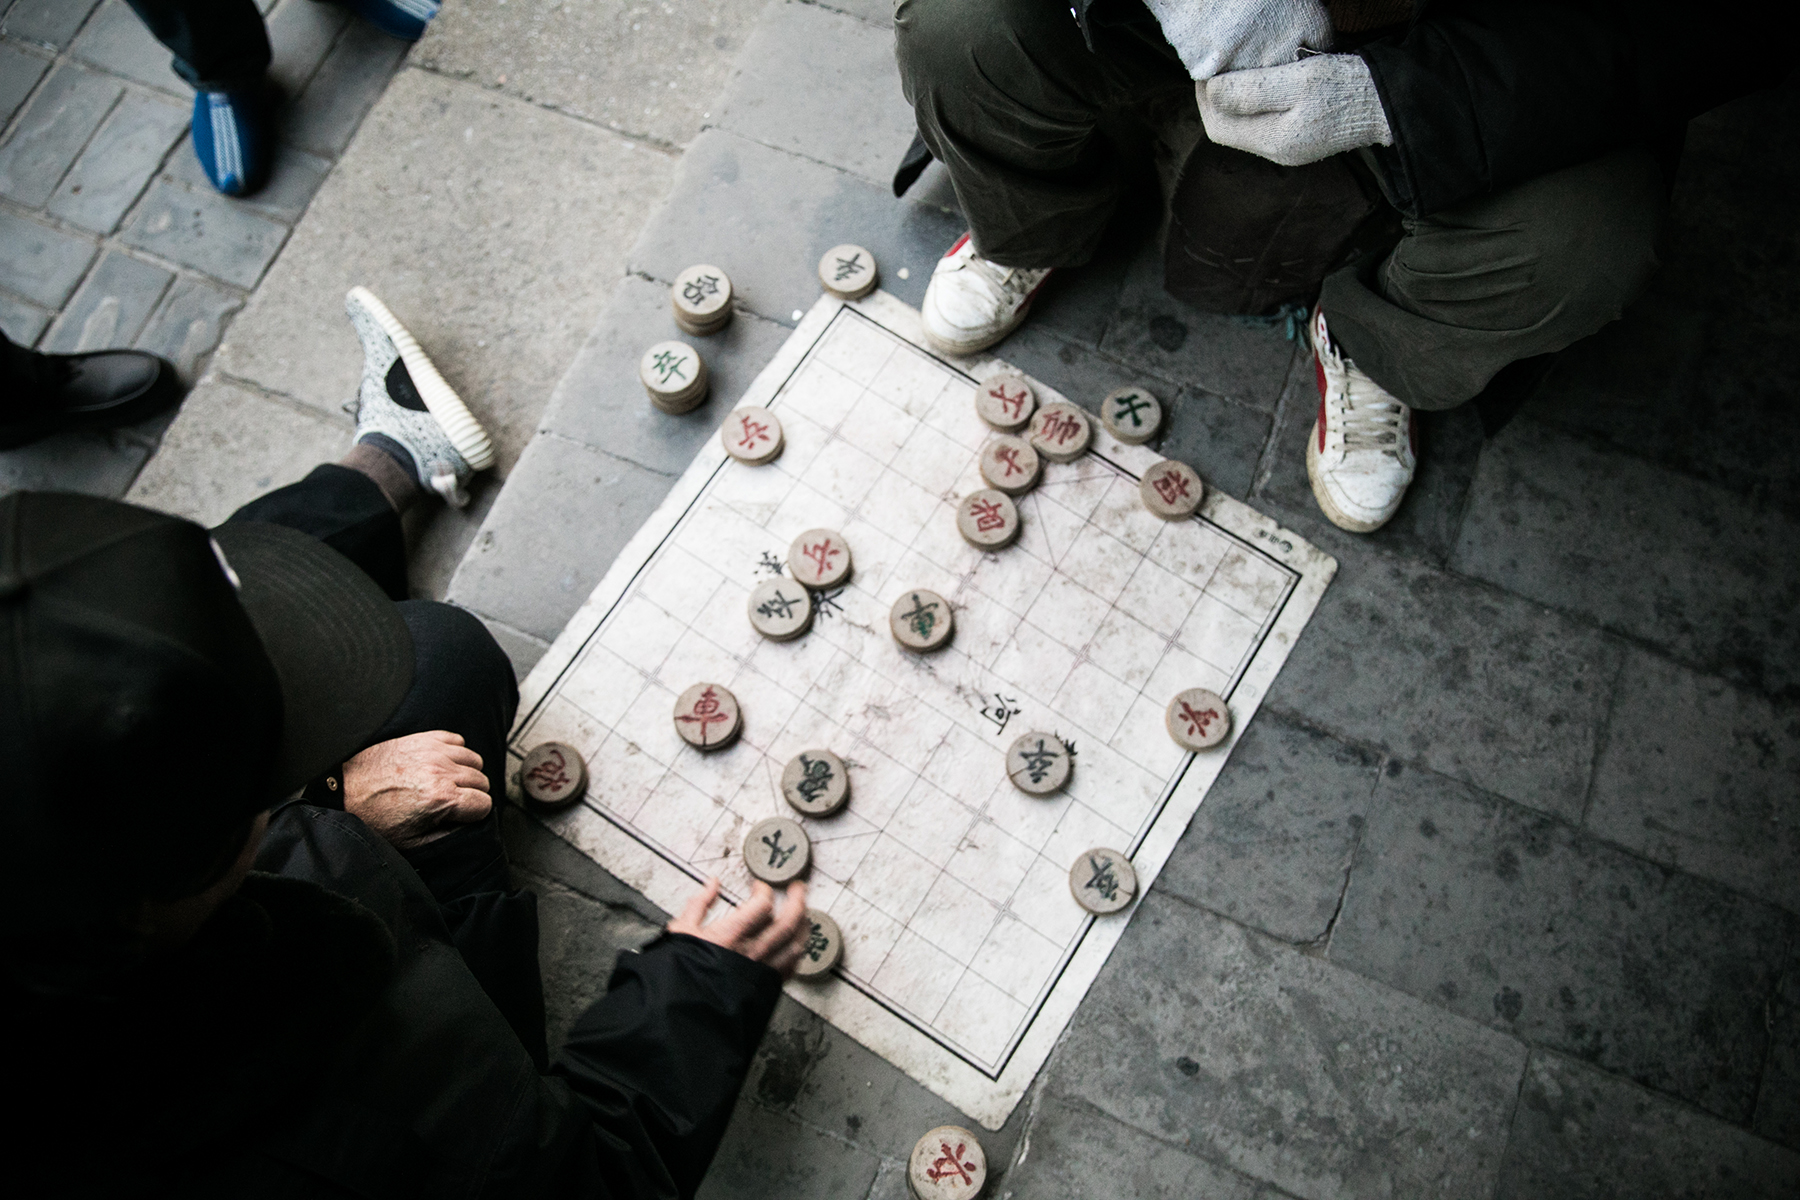 Two men play a game of "Xiangqi" on the Temple grounds - quite literally placing their playing mat on the concrete. Spectators watch eagerly over their game play, with the low angle of the board giving them the best view.